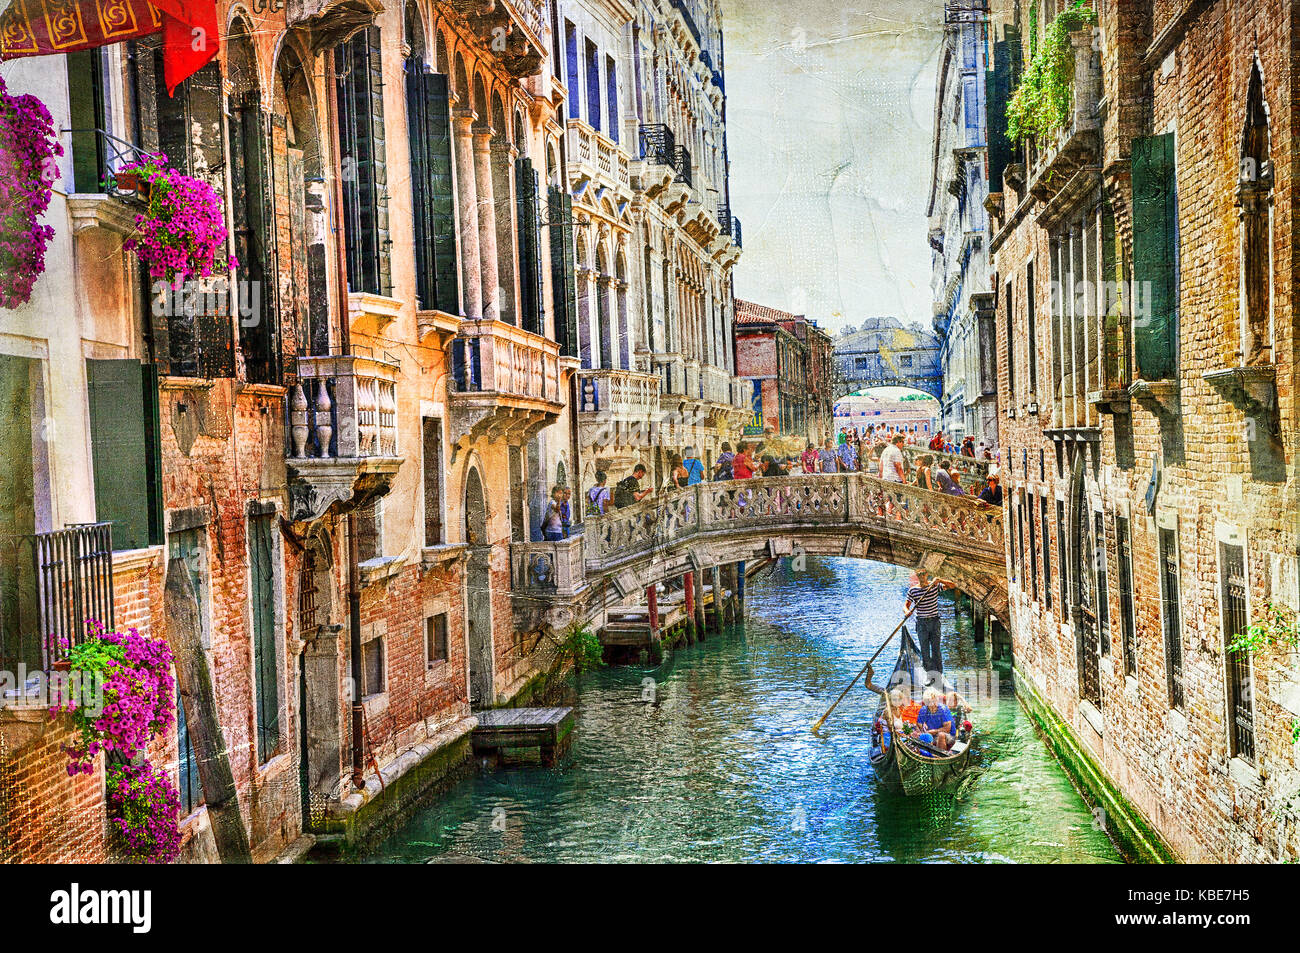 Romantic beautiful Venice - artistic picture in painting style Stock Photo